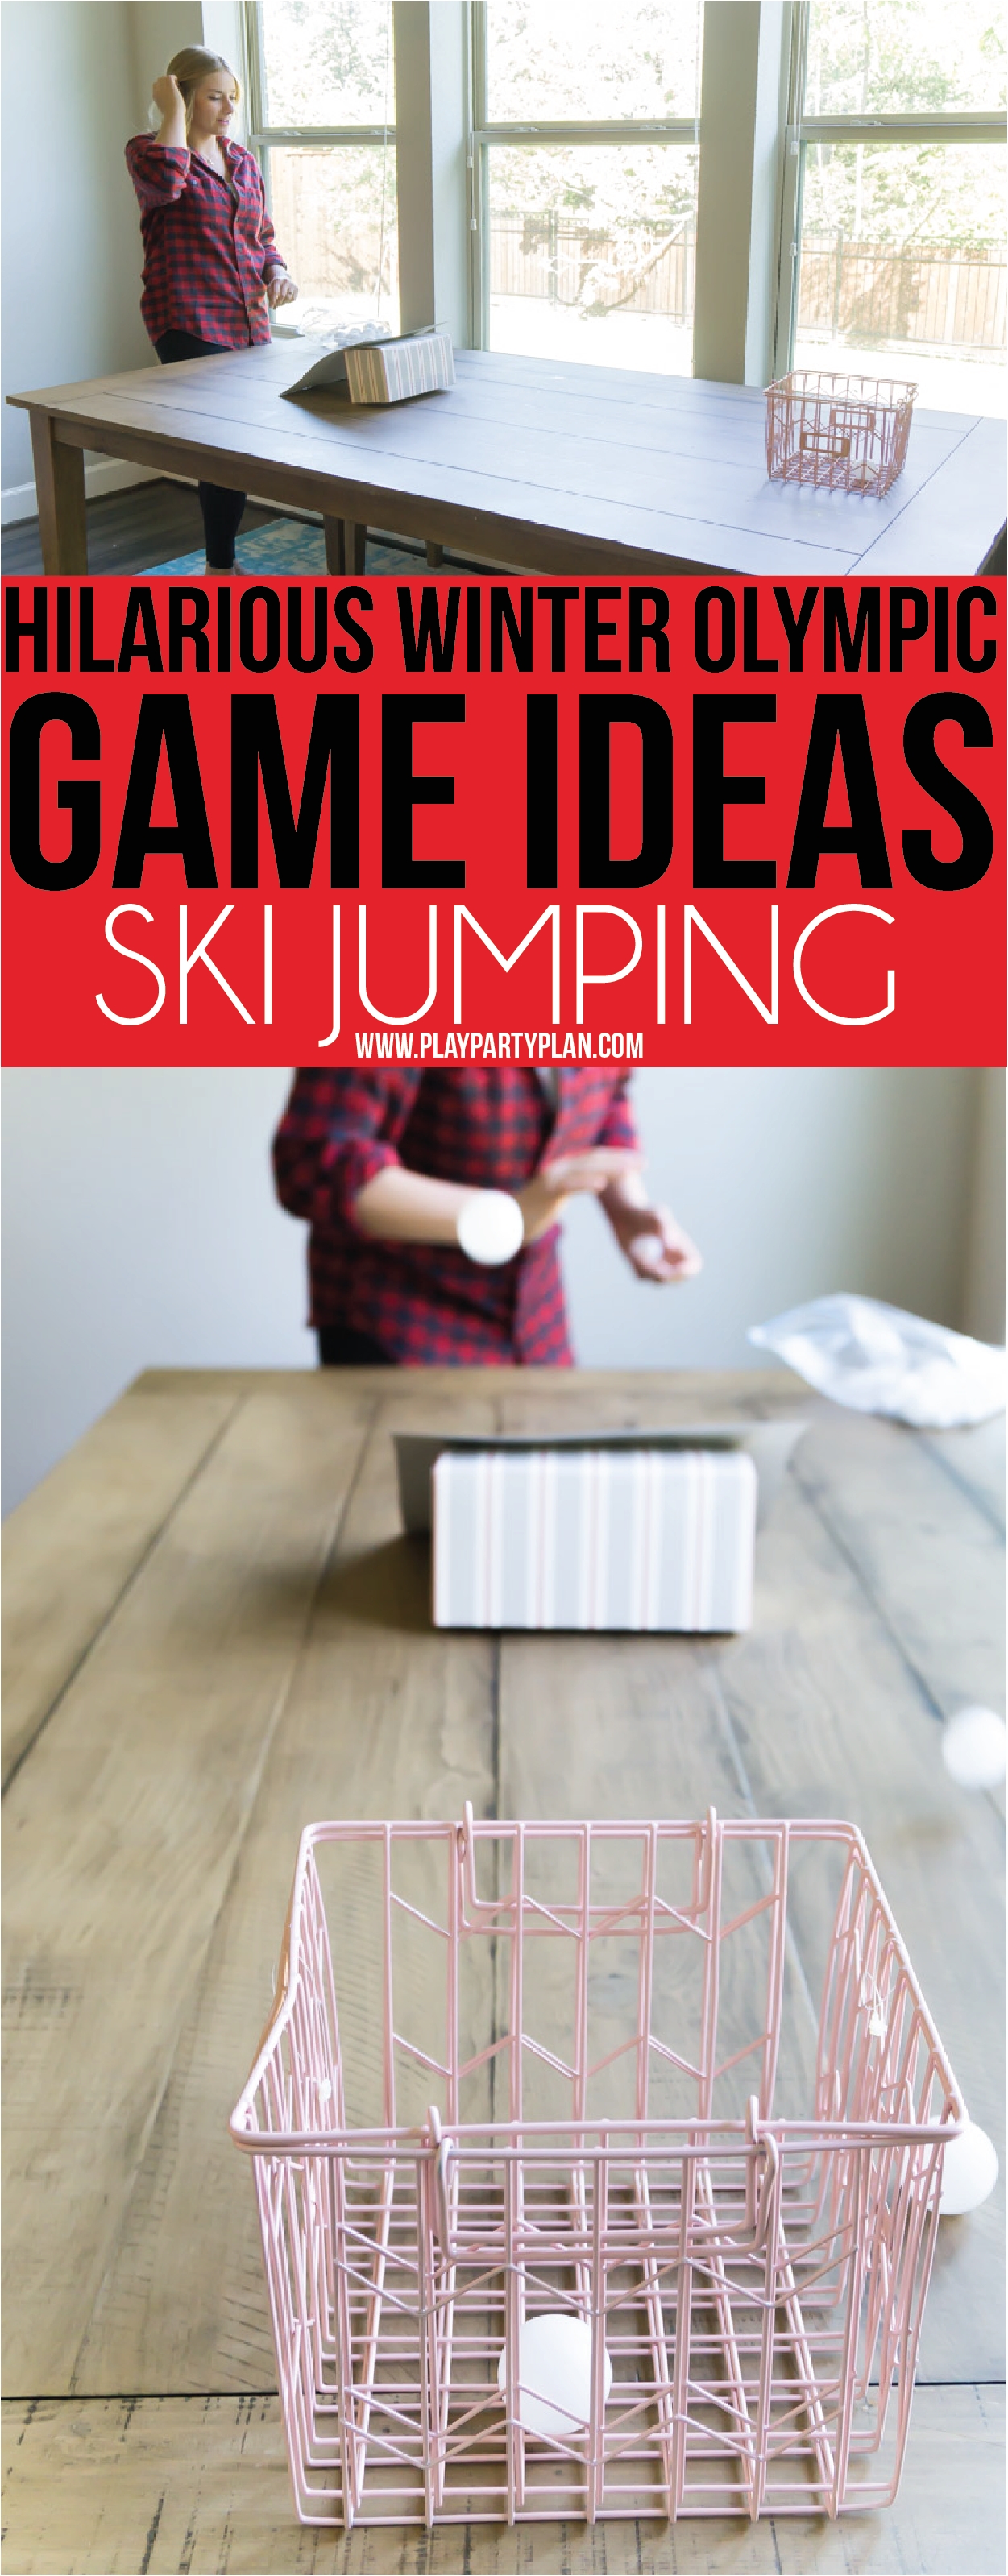 olympic themed party games inspired by winter olympic sports